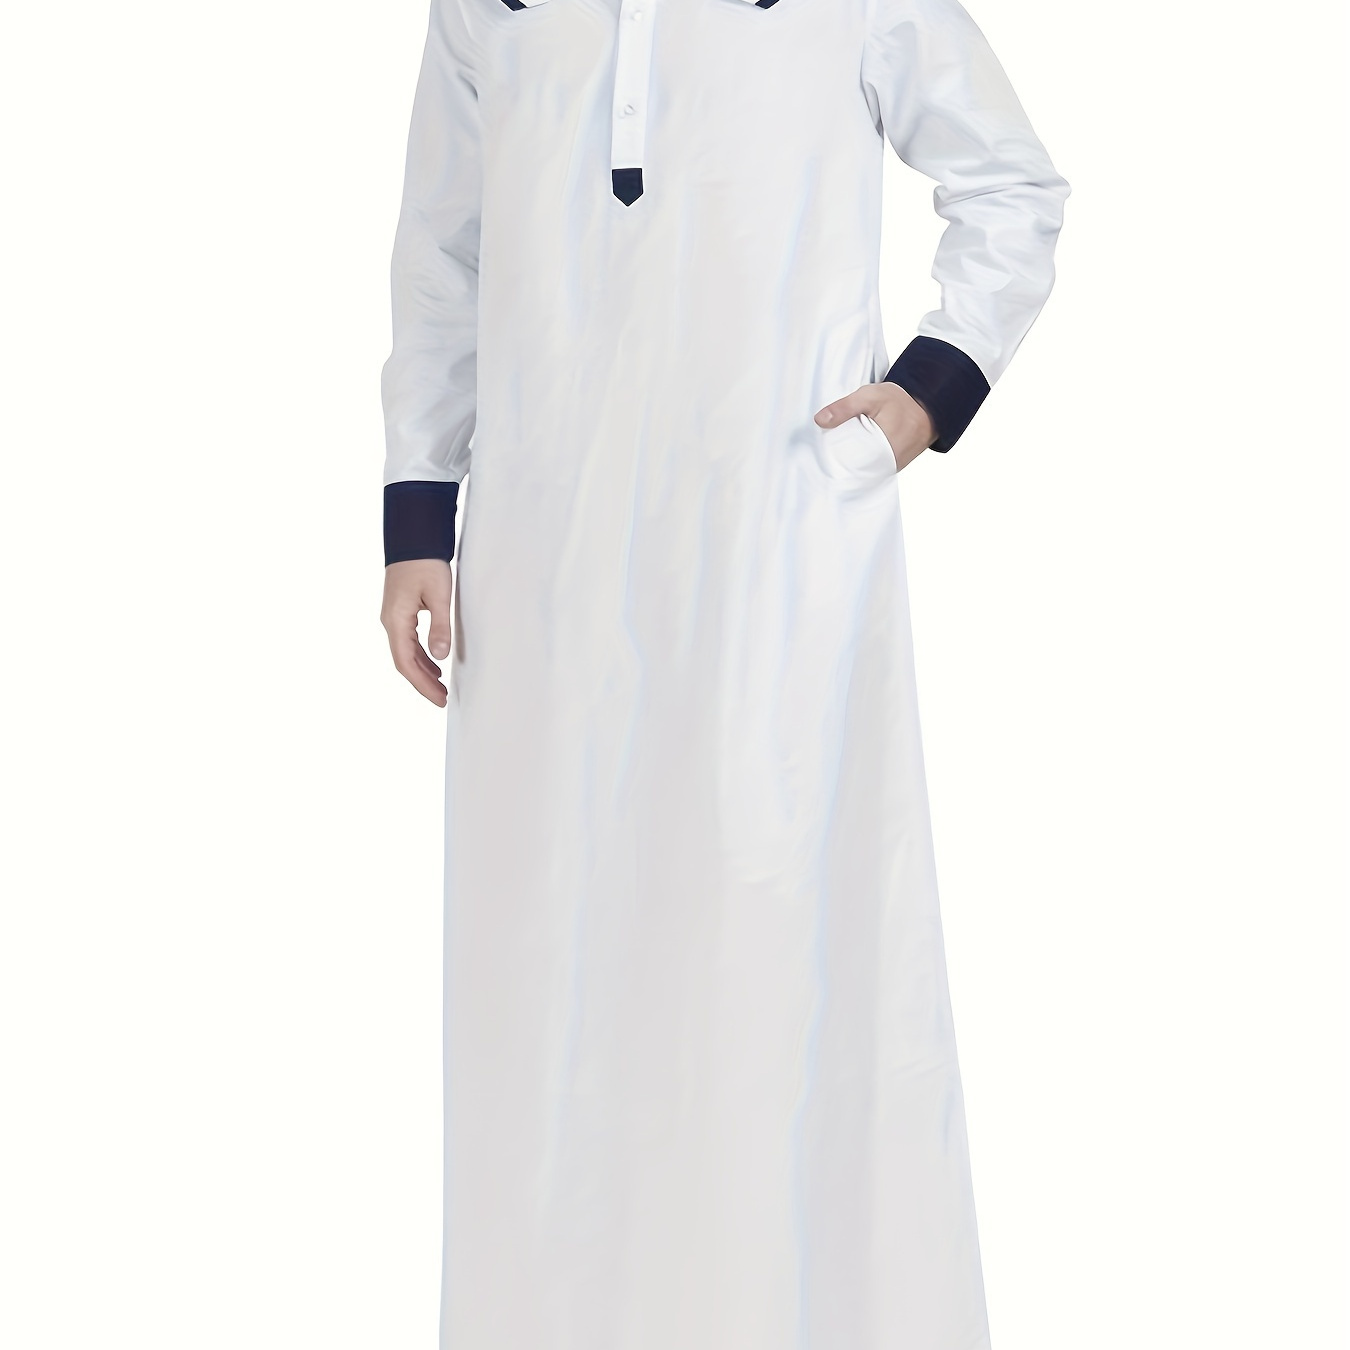 

Muslim Men's Color Block Thobe, Long Sleeve Robes Button Up With Side Pockets And Stand Collar, Islamic Arabic Kaftan Men Abaya